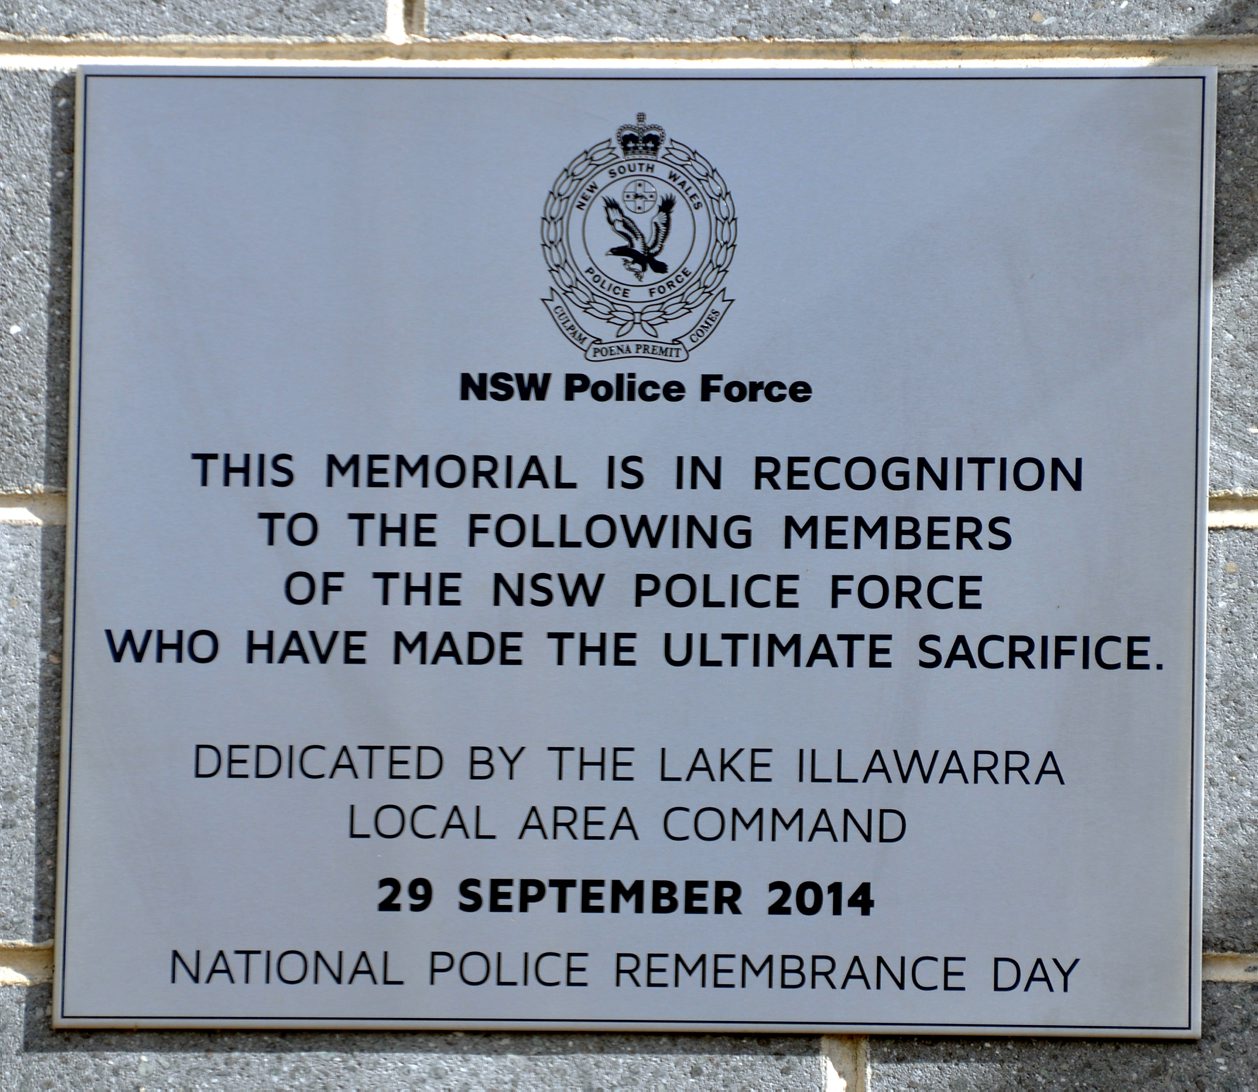 NSW Police Force. This memorial is in recognition to the following members of the NSW Police Force who have made the ultimate sacrifice. Dedicated by the Lake Illawarra Local Area Command. 29 September 2014. National Police Remembrance Day.